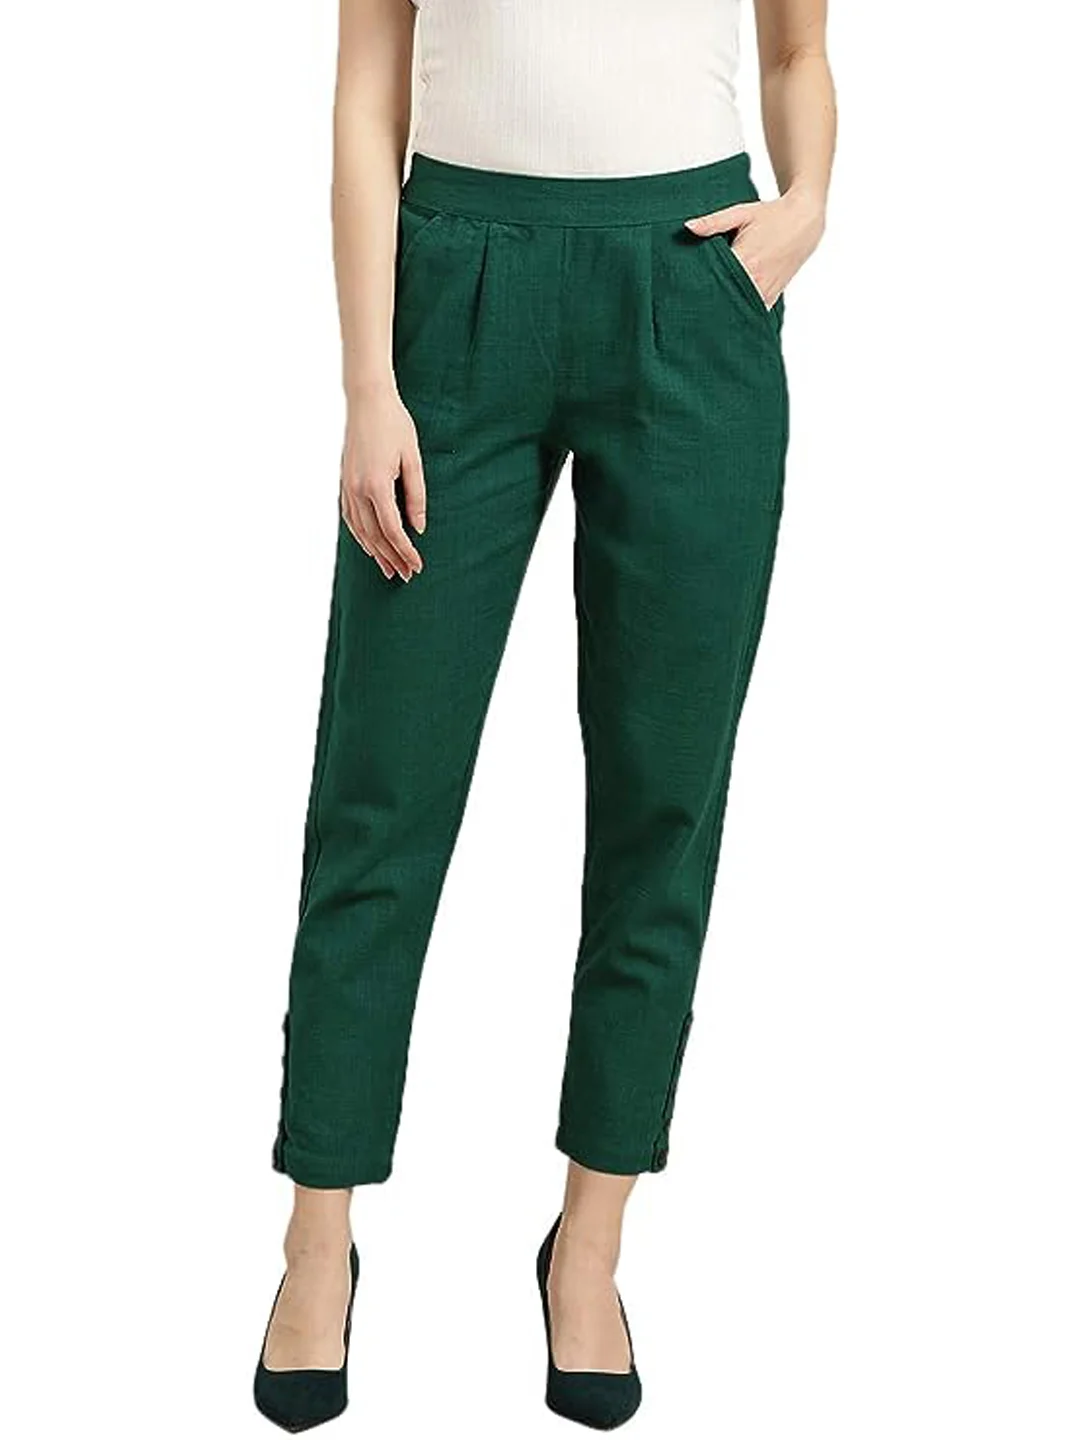 Green Trousers for men: Well-dressed for every occasion | ZALANDO